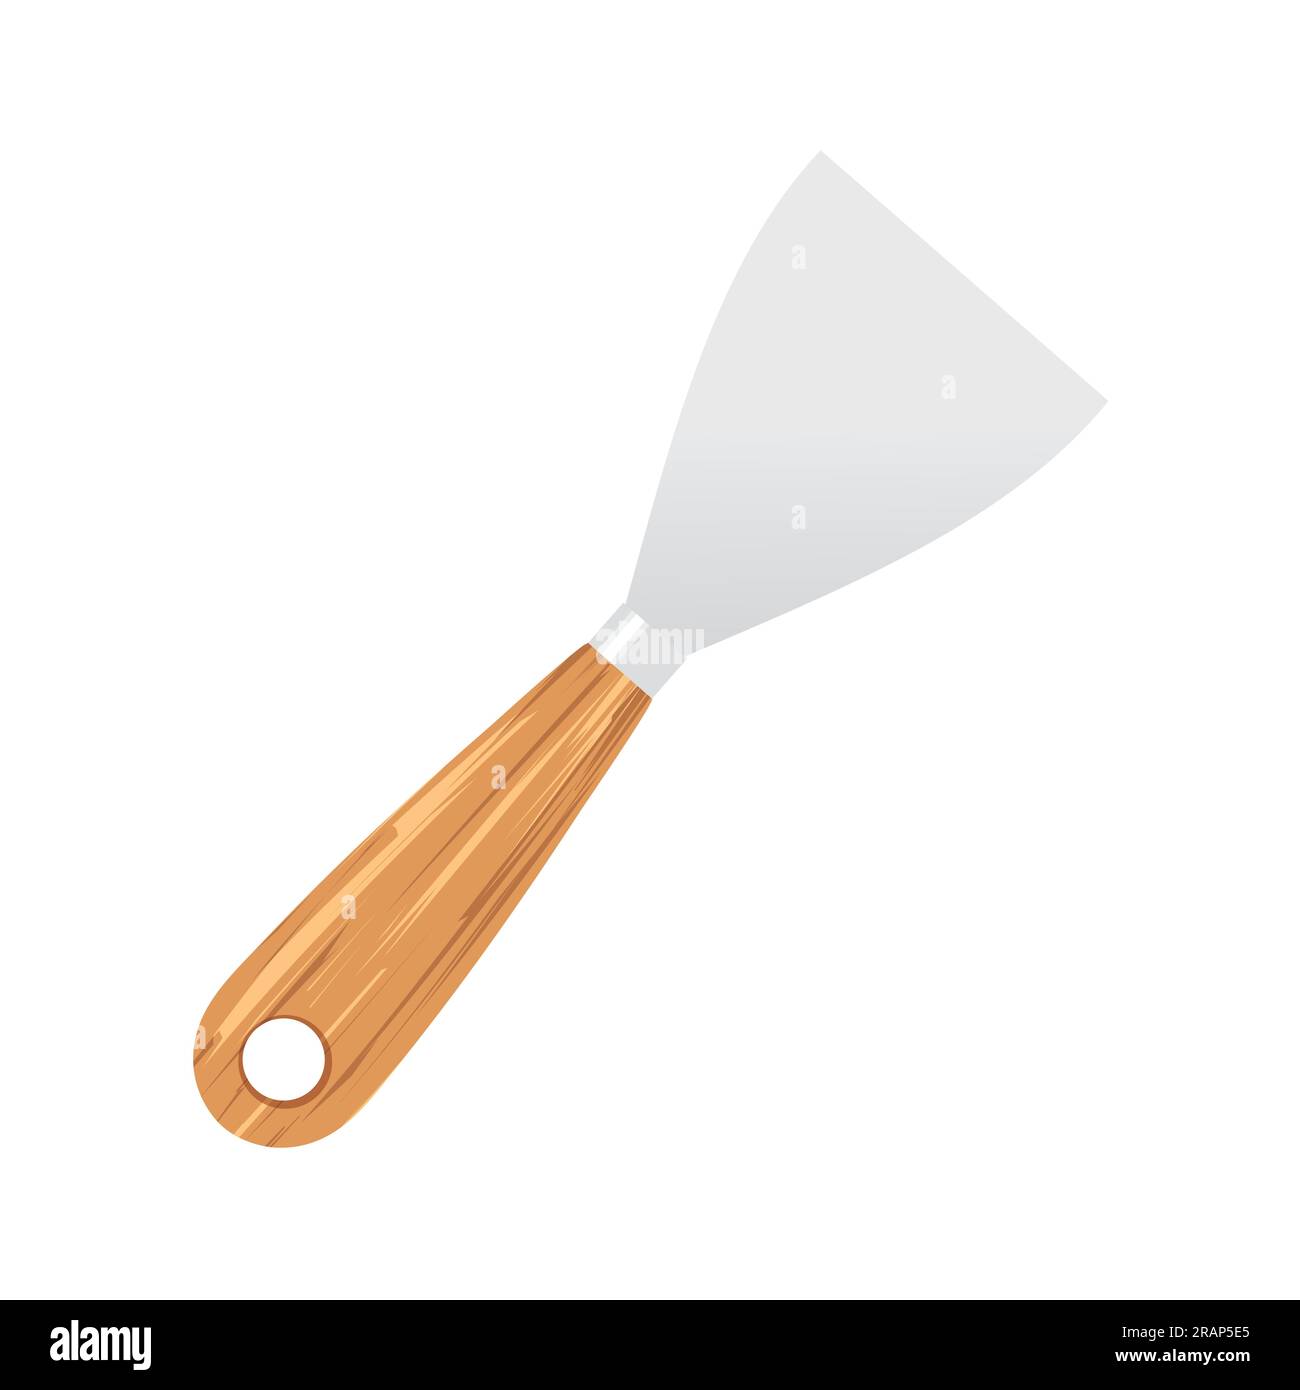 putty knife icon - vector illustration Stock Vector